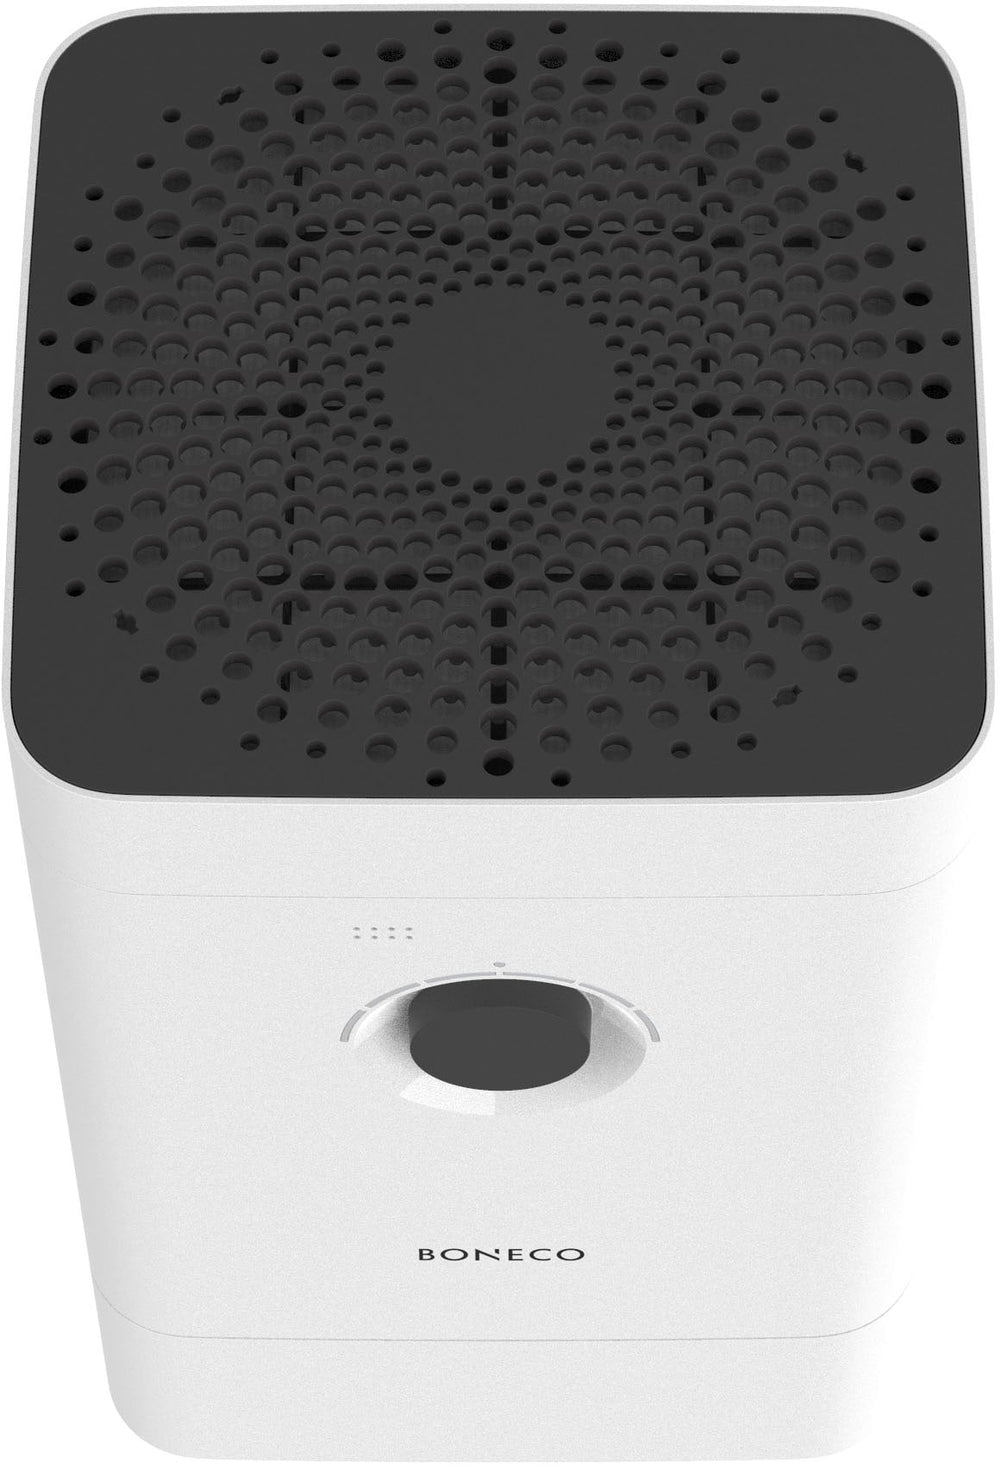 Boneco - H300 Hybrid (3-in-1 Humidifier and Air Purifier) - White_1